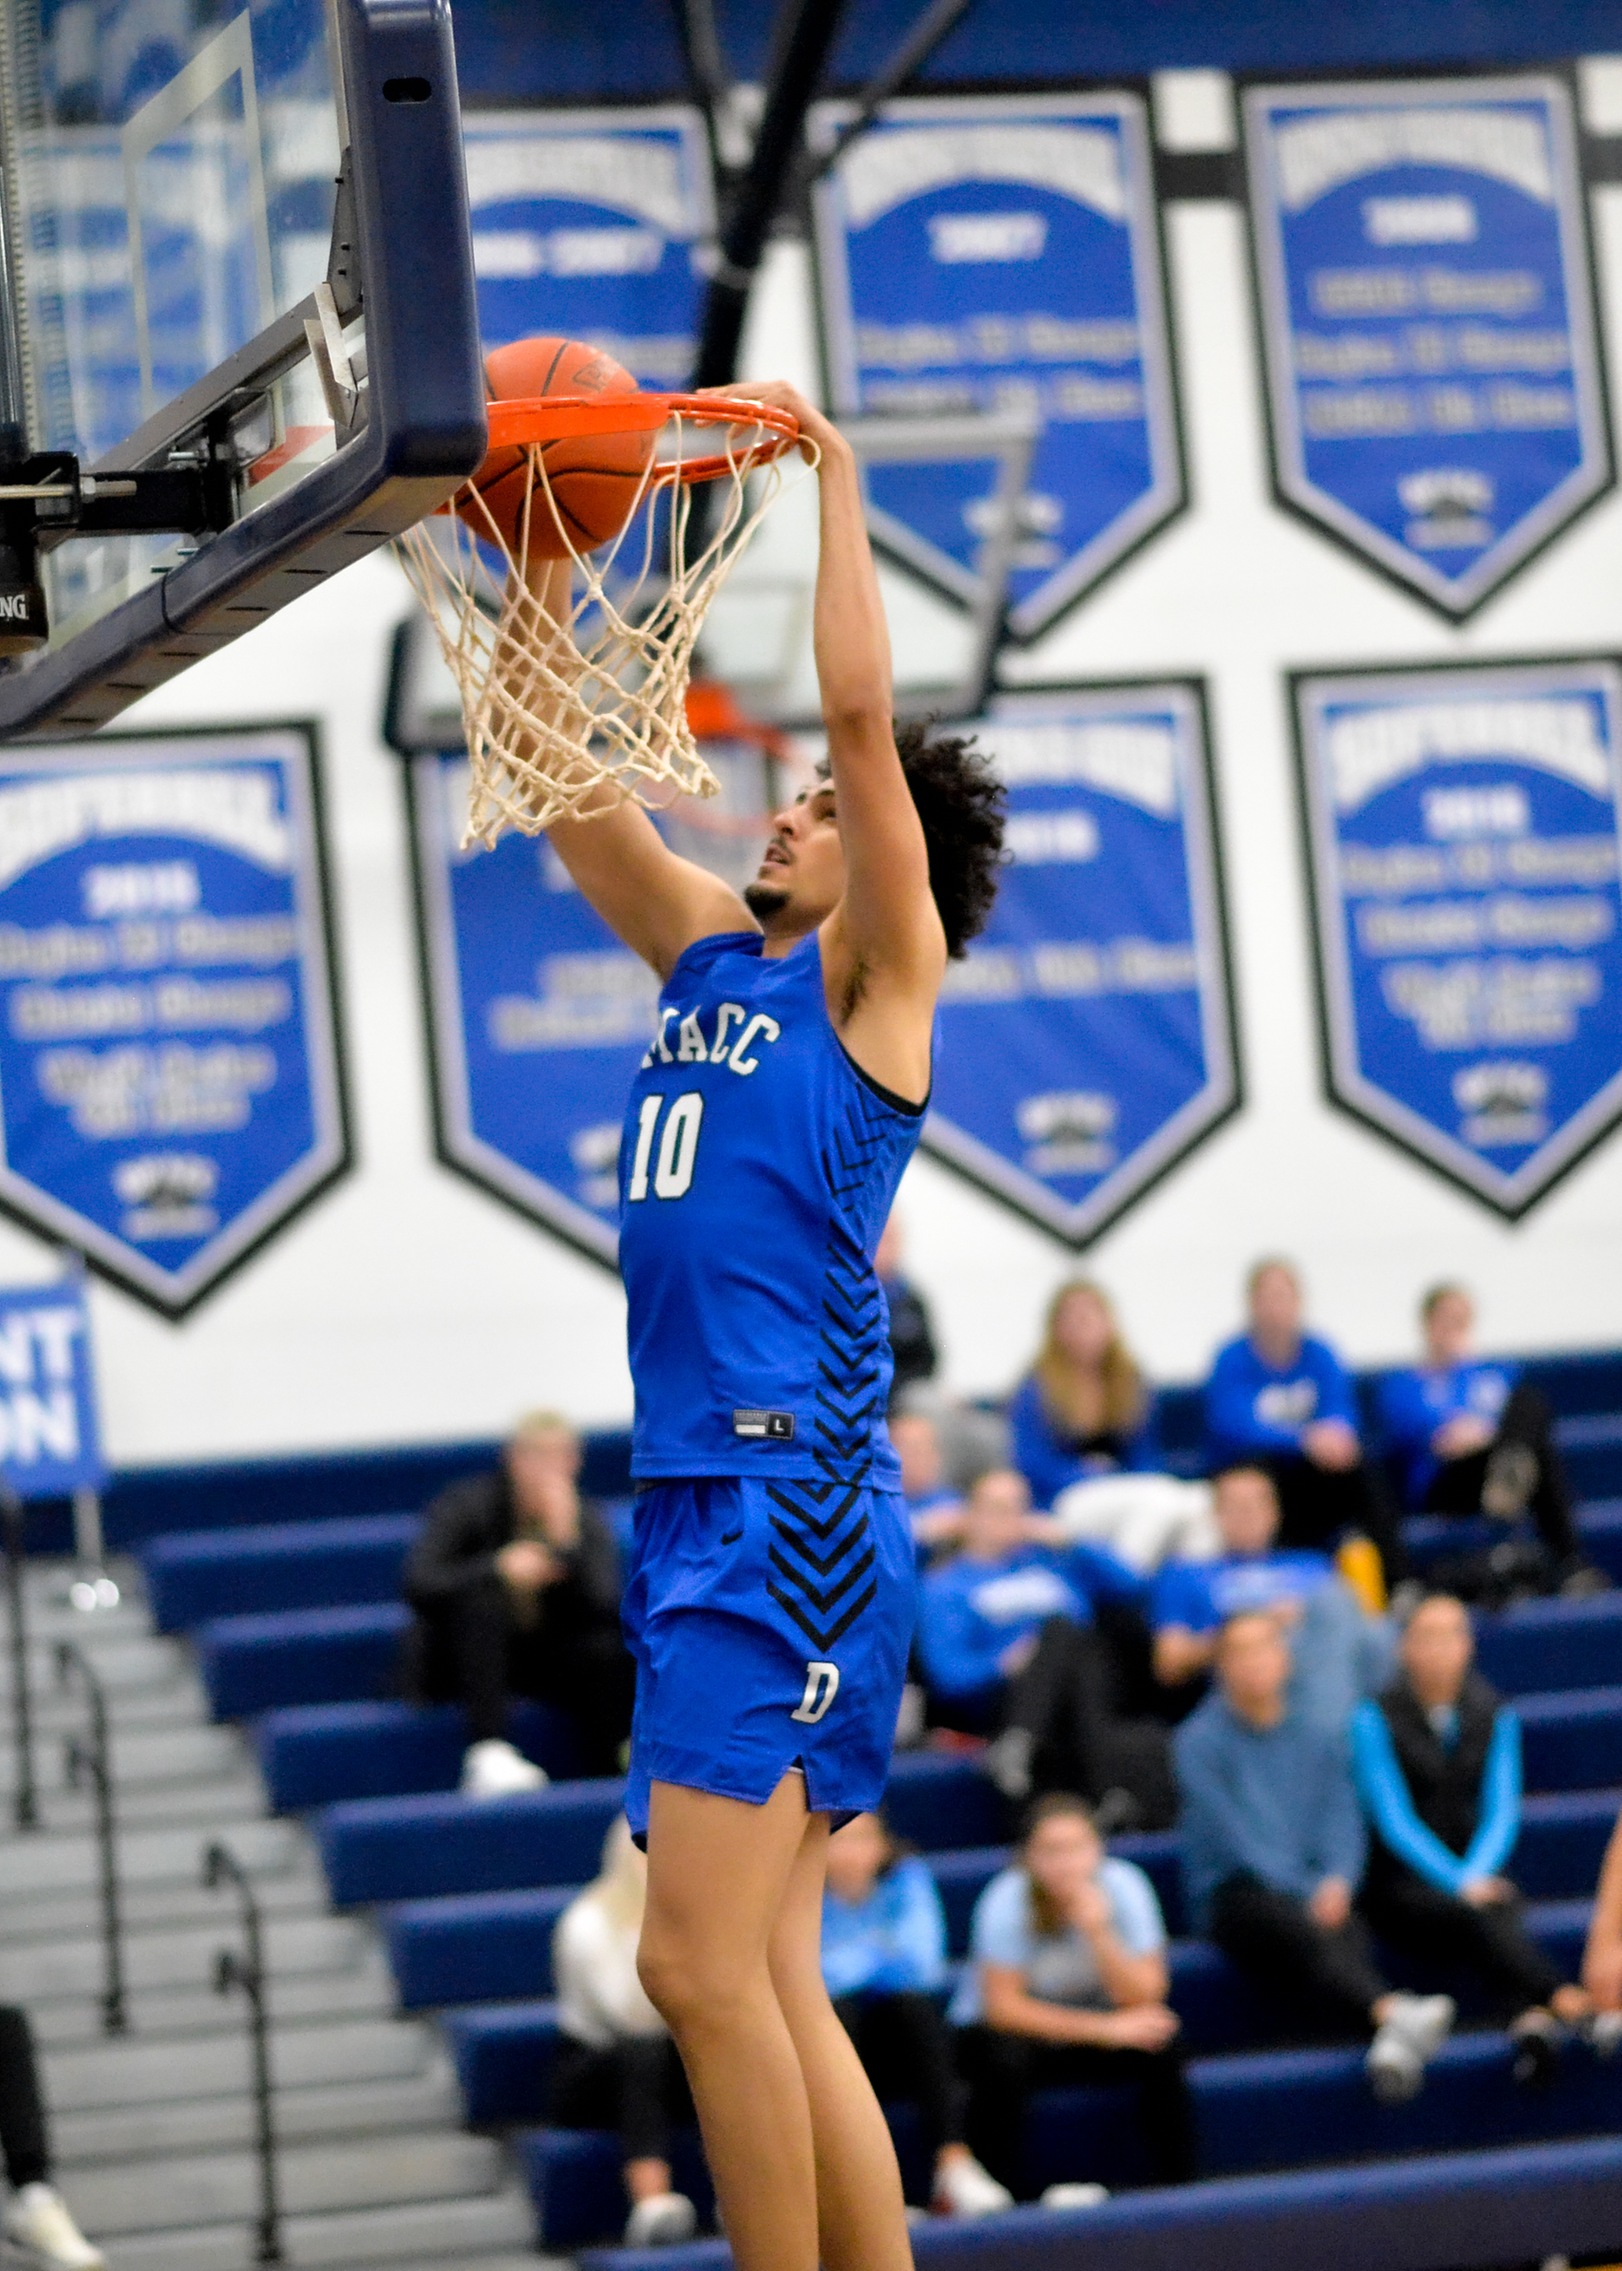 DMACC men's basketball rolls to easy 106-70 win over IWCC